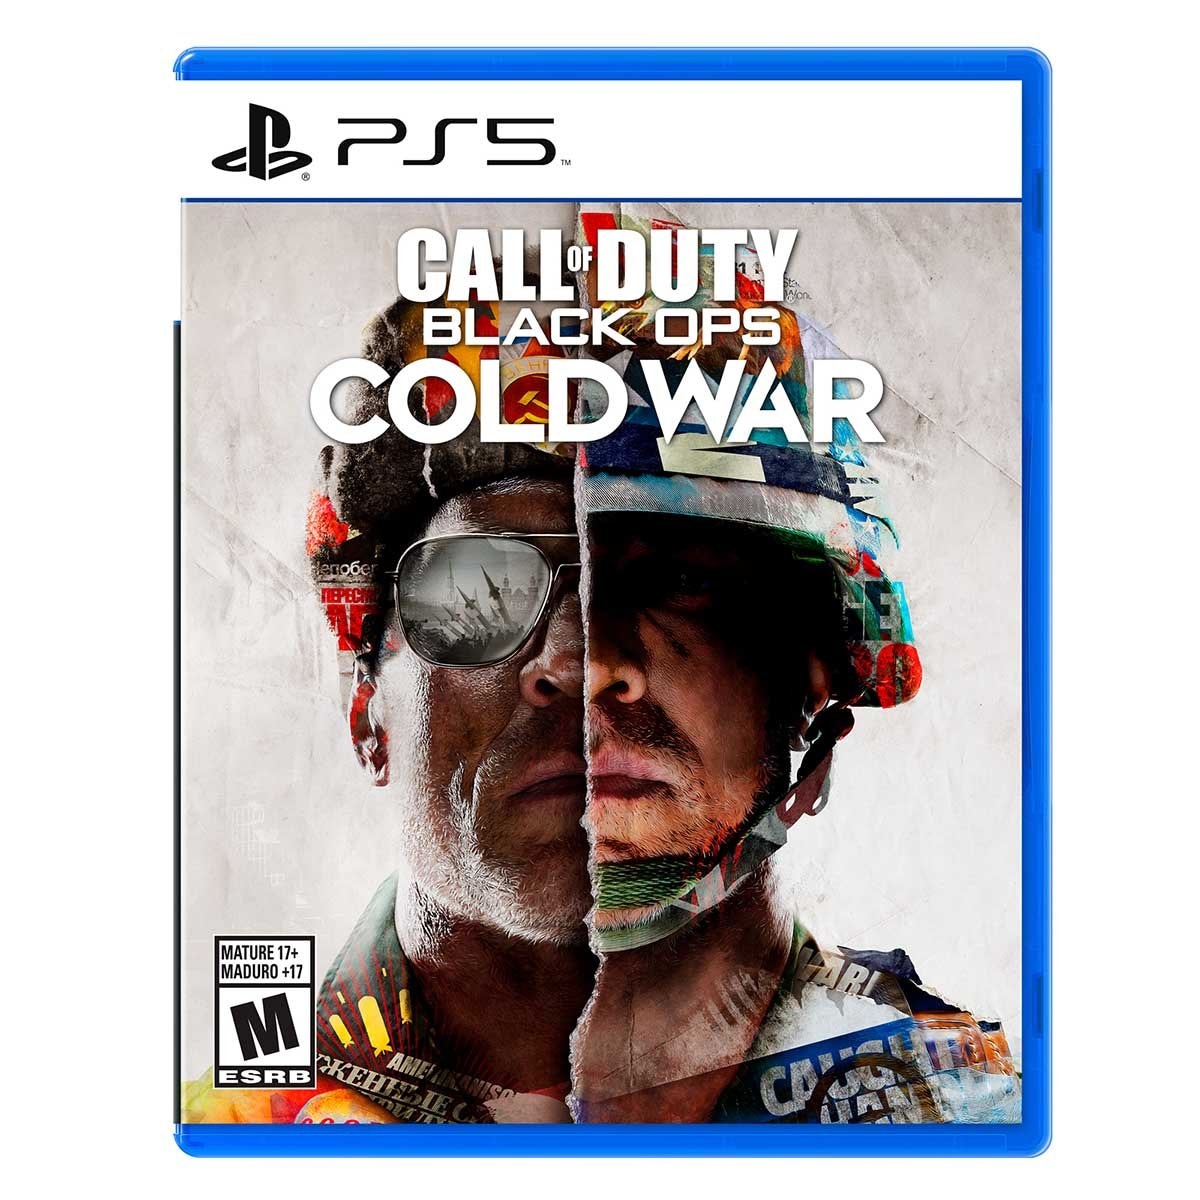 Ps5 Call Of Duty Black Ops Cold War